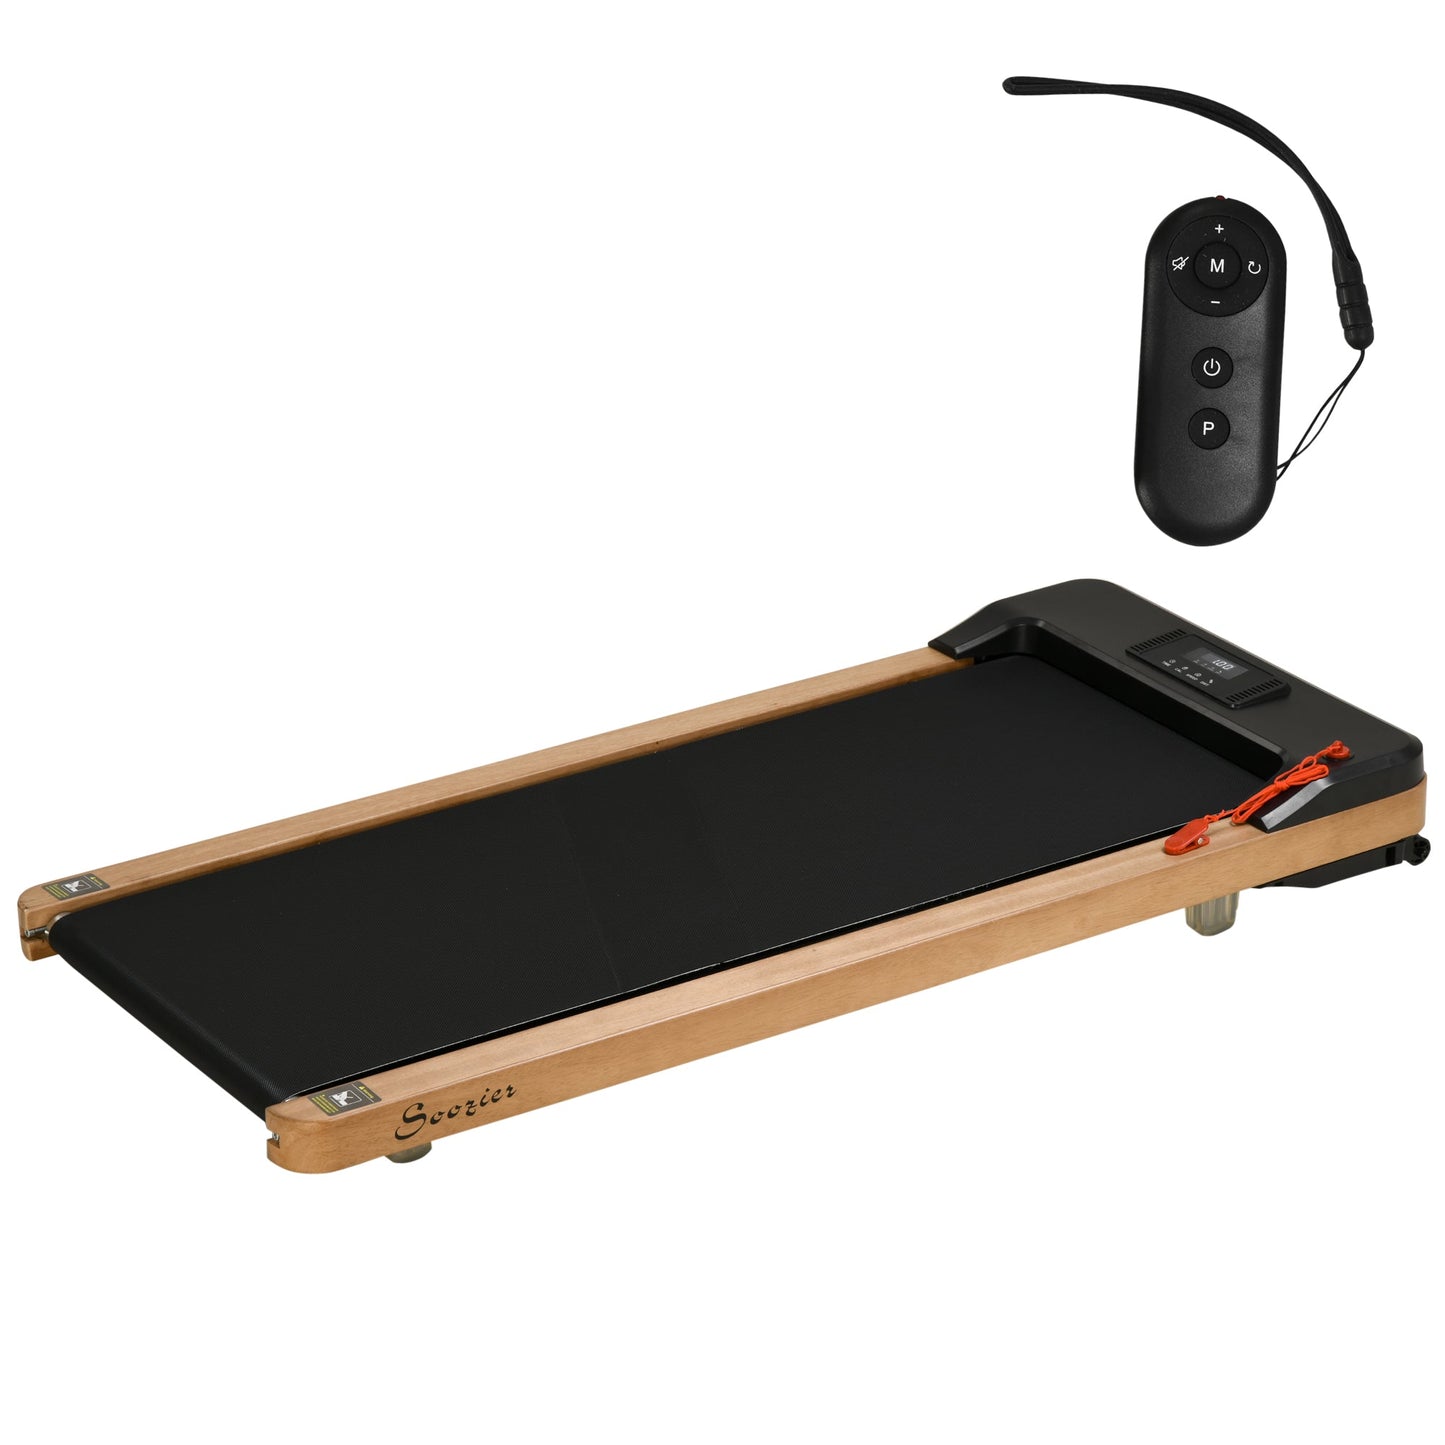 Sports and Fitness-Wood Walking Pad, Under Desk Treadmill, Walking Jogging Machine with Blue Tooth Speaker, 12 Pre-Programs, Transport Wheels for Home Gym Office - Outdoor Style Company